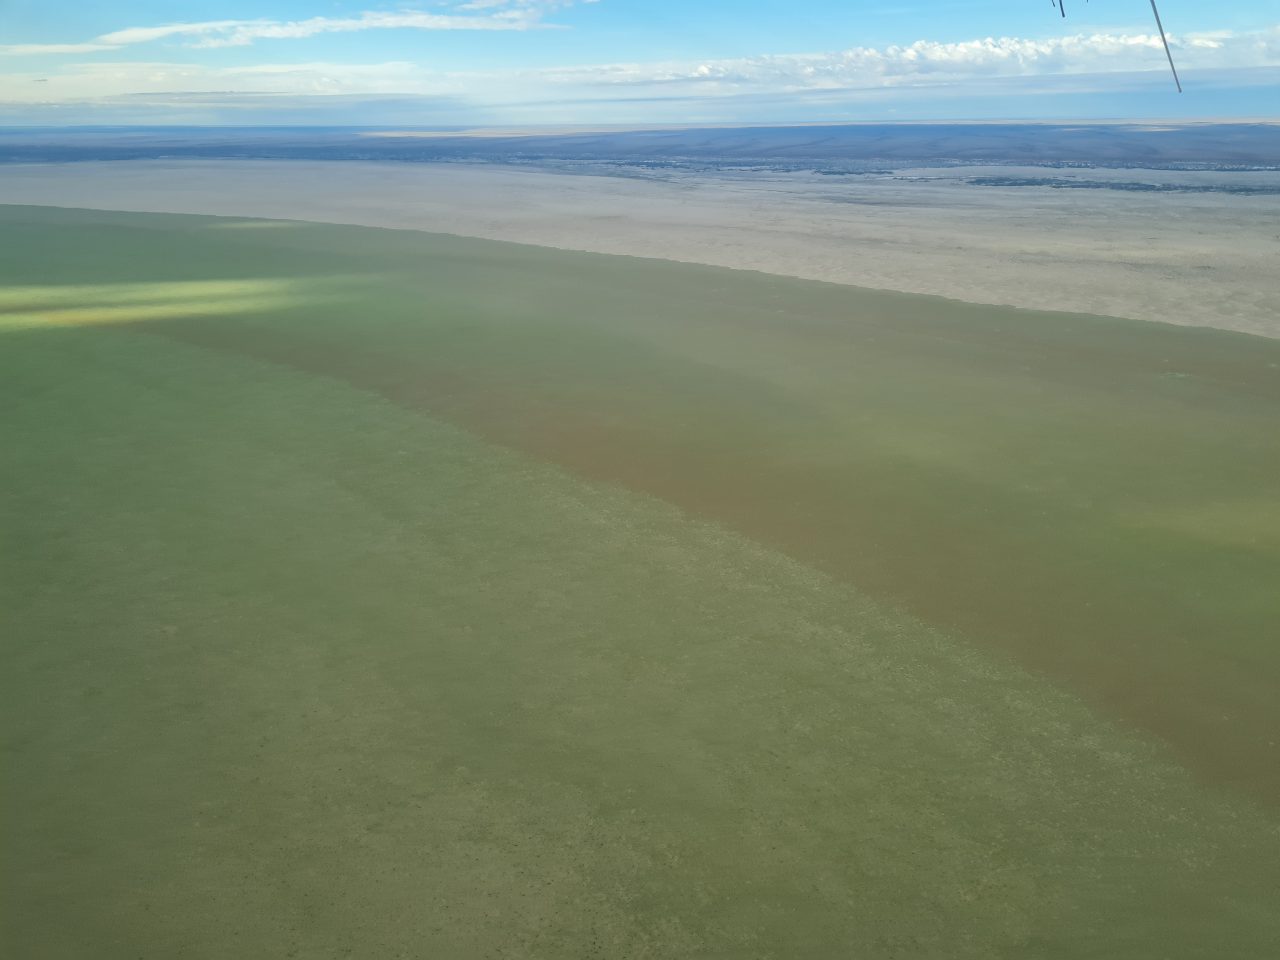 Aerial photo of lake with green water that has passed it's usual high water mark and is spilling out onto surrounding brown floodplain